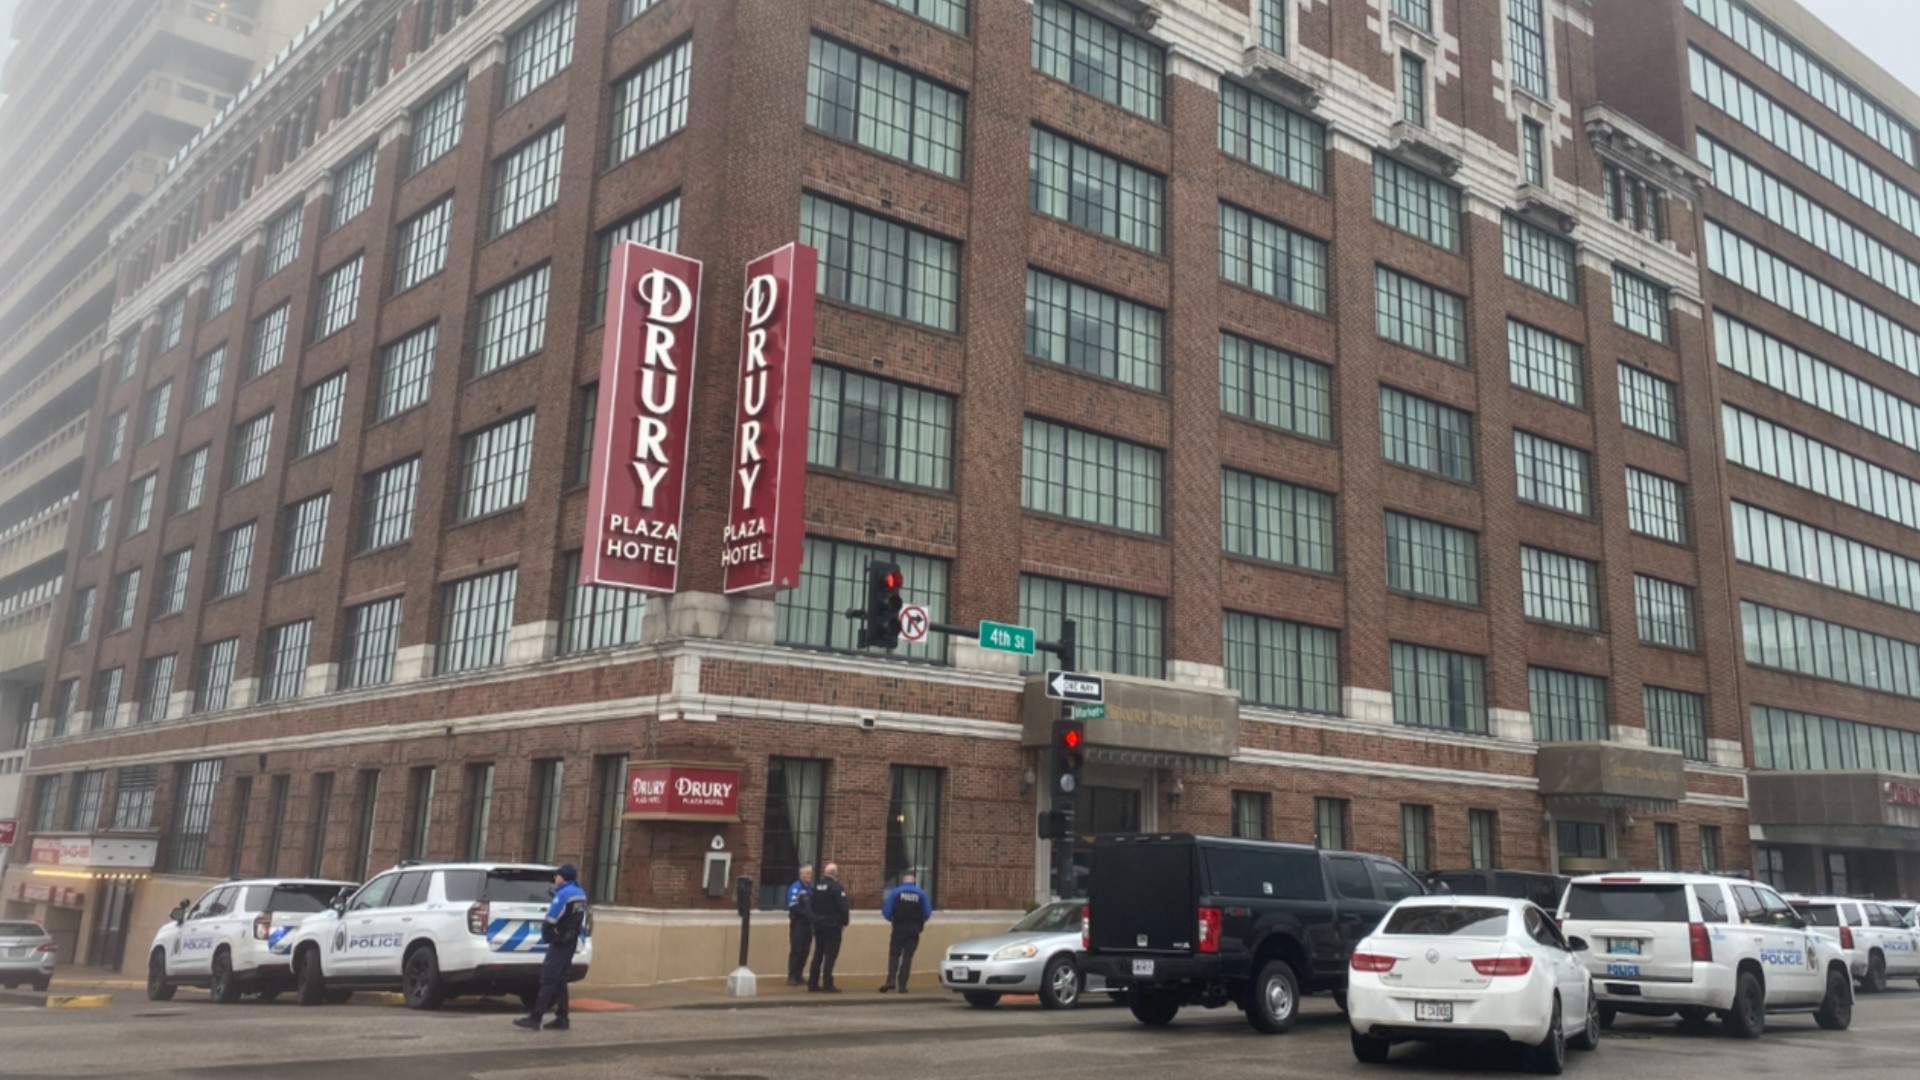 Two children were released from a hostage situation at a downtown St. Louis hotel room. A woman remains held against her will Wednesday morning.